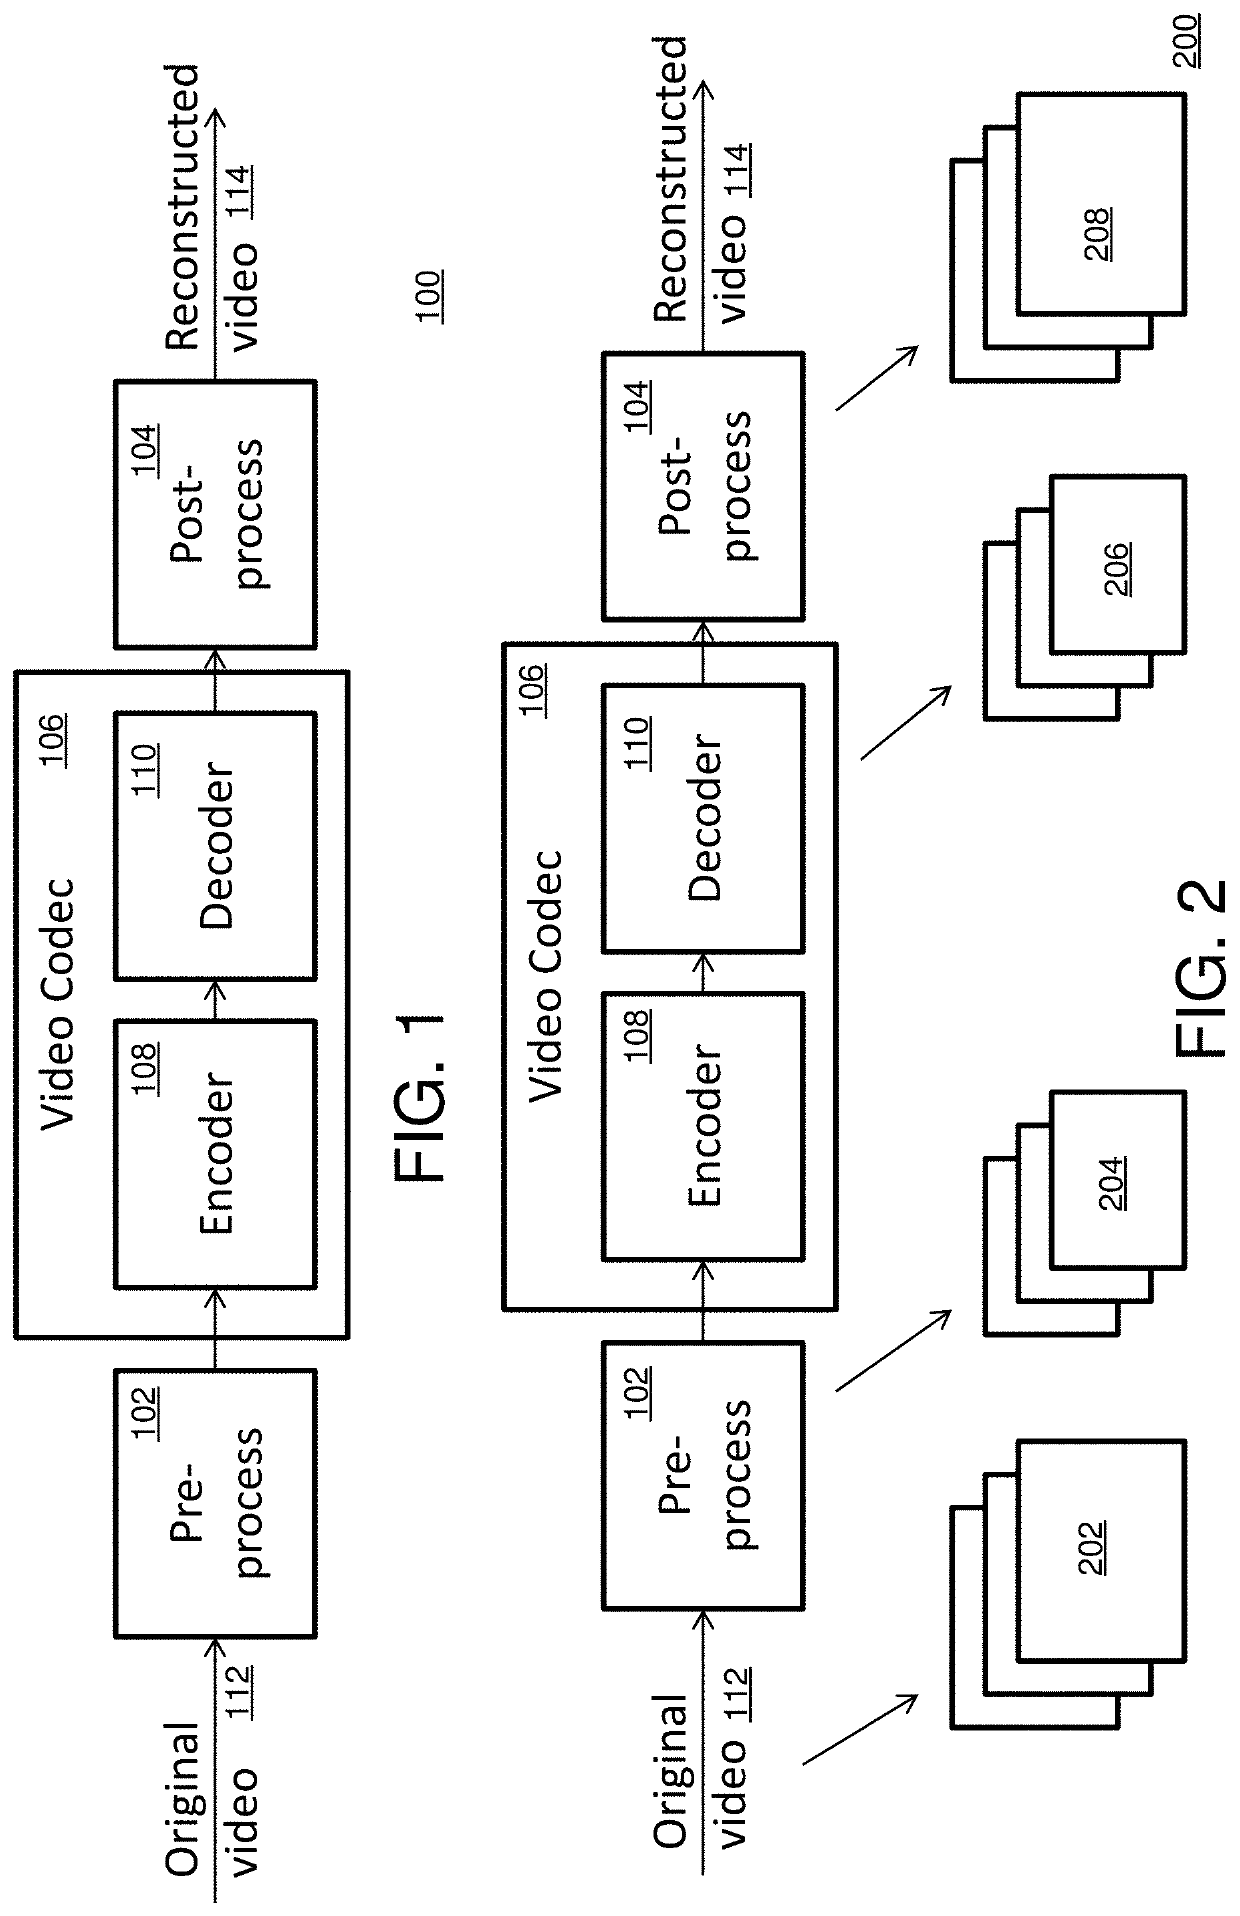 Method and system for real-time content-adaptive transcoding of video content on mobile devices to save network bandwidth during video sharing